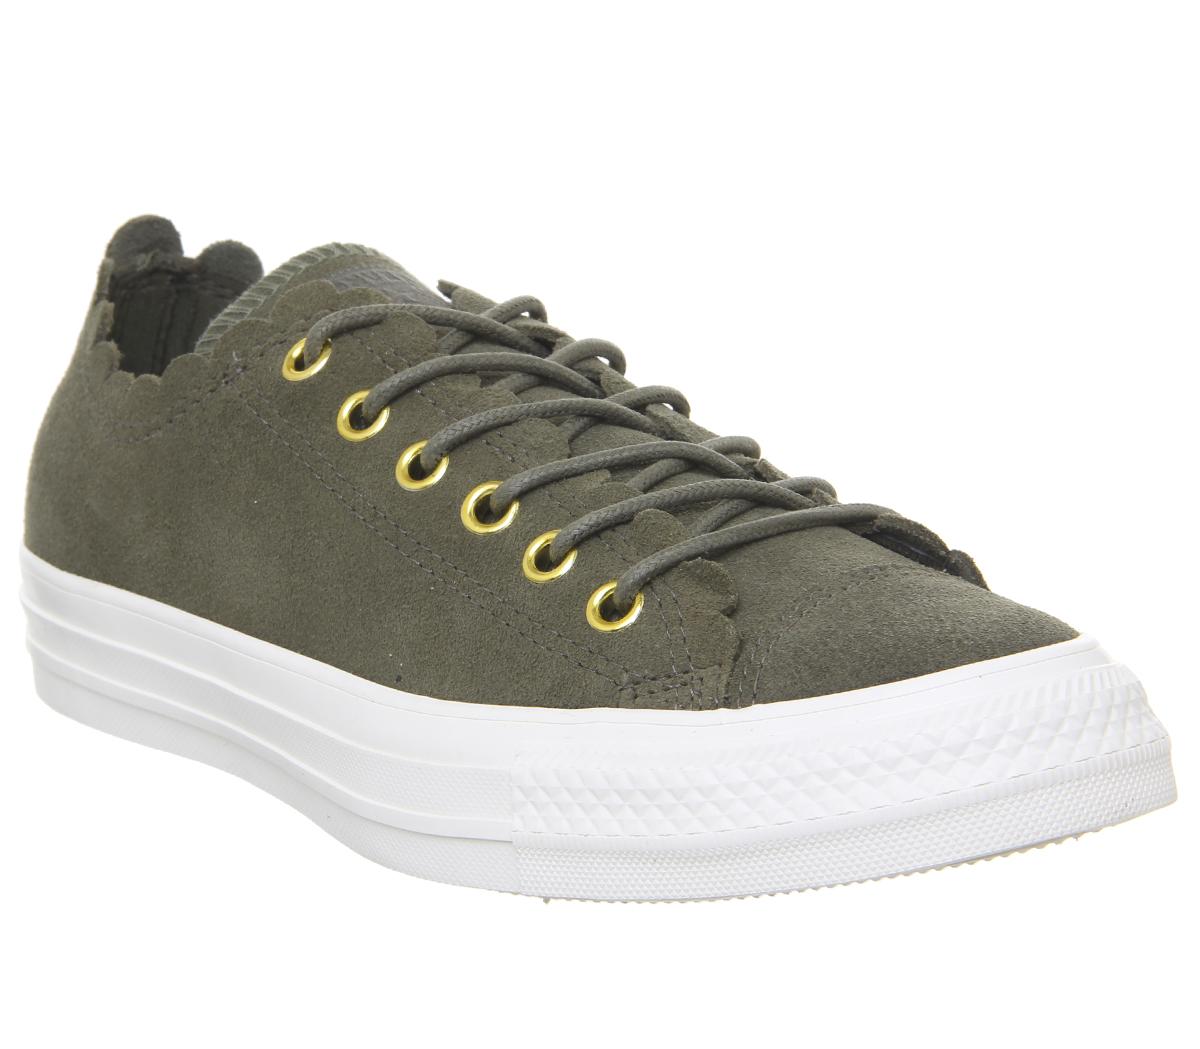 ConverseConverse All Star Low TrainersField Surplus Gold Frill